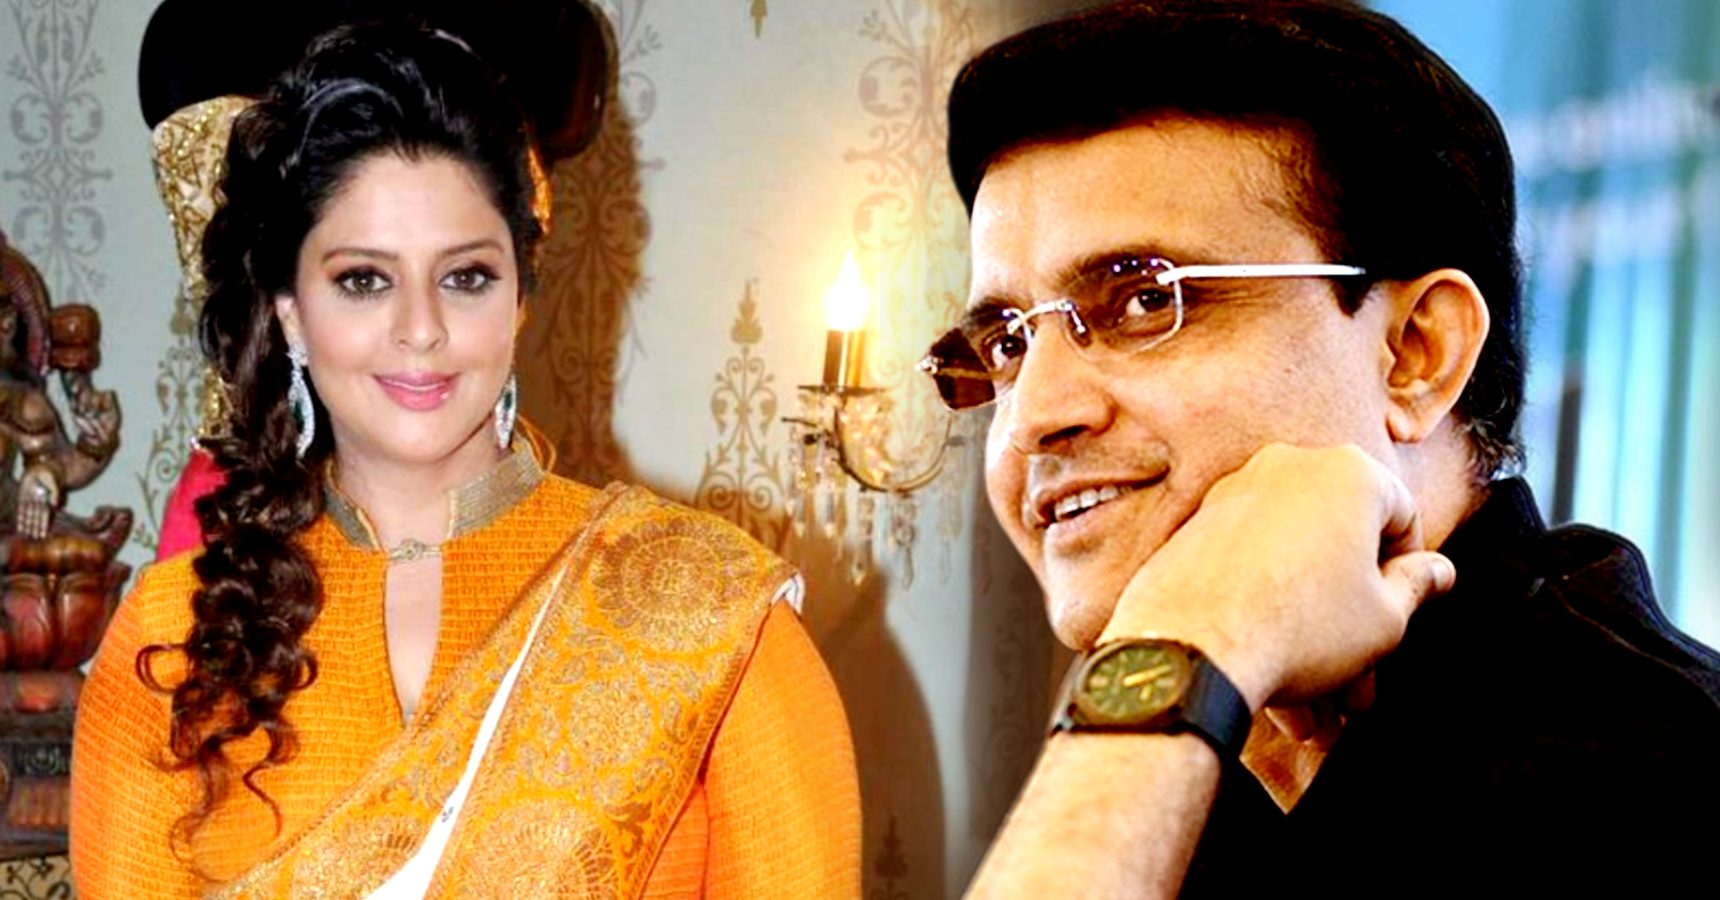 Nagma Sourav Ganguly affair, when the actress revealed the reason behind their break up